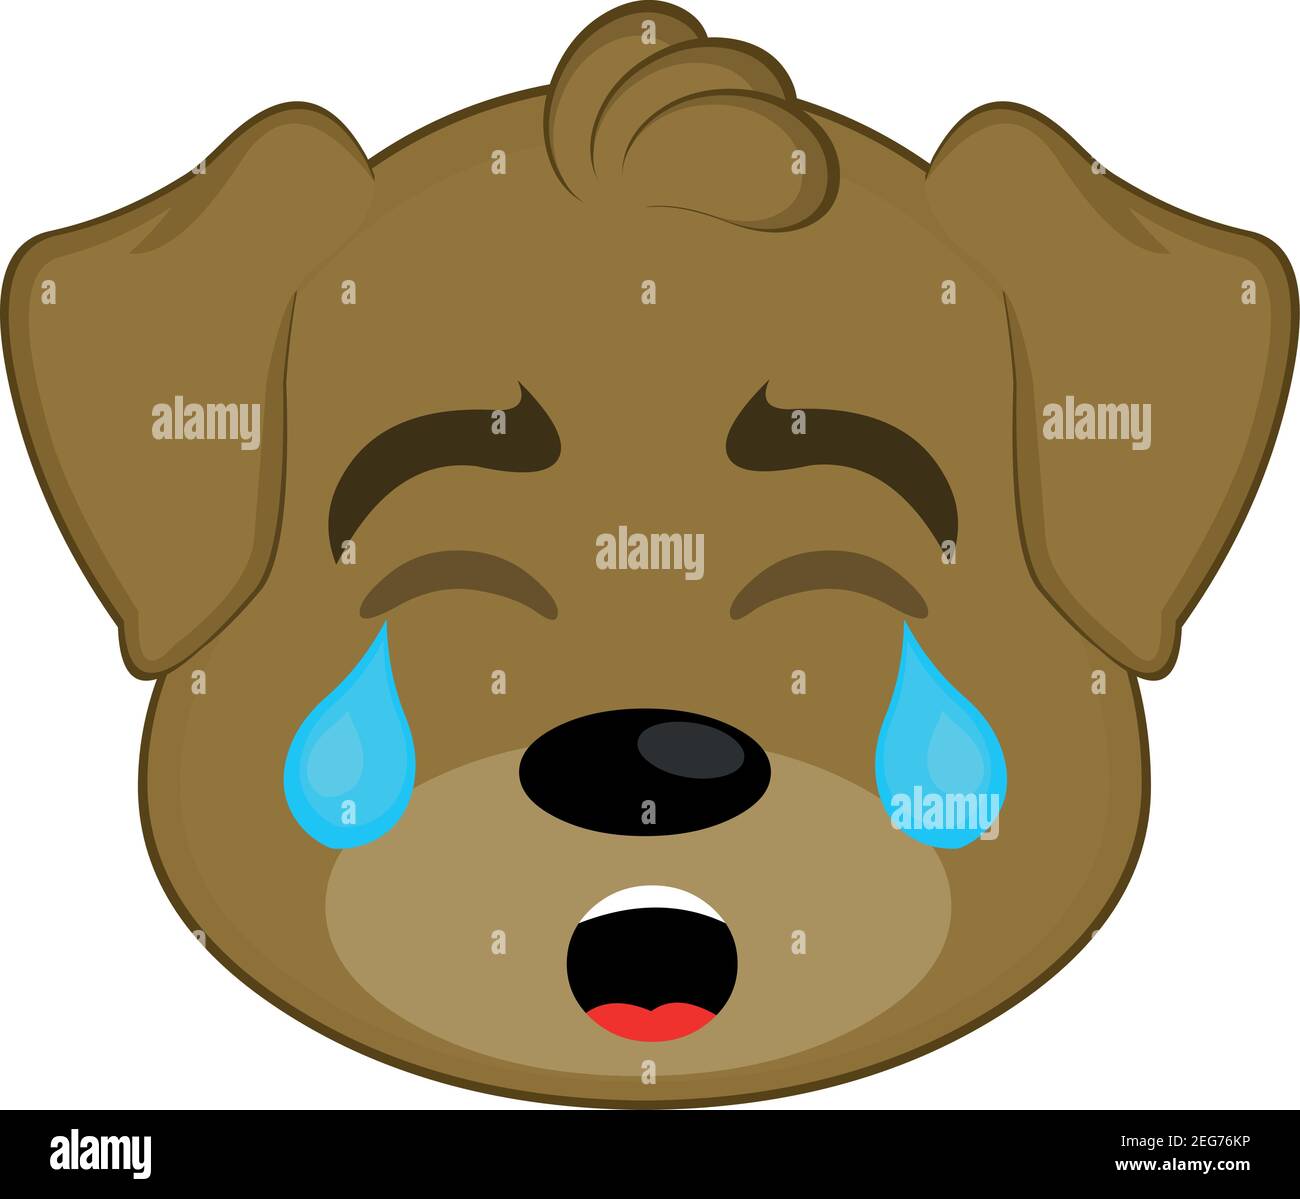 Vector emoticon illustration of the face of a cartoon dog crying and with tears falling from his eyes Stock Vector